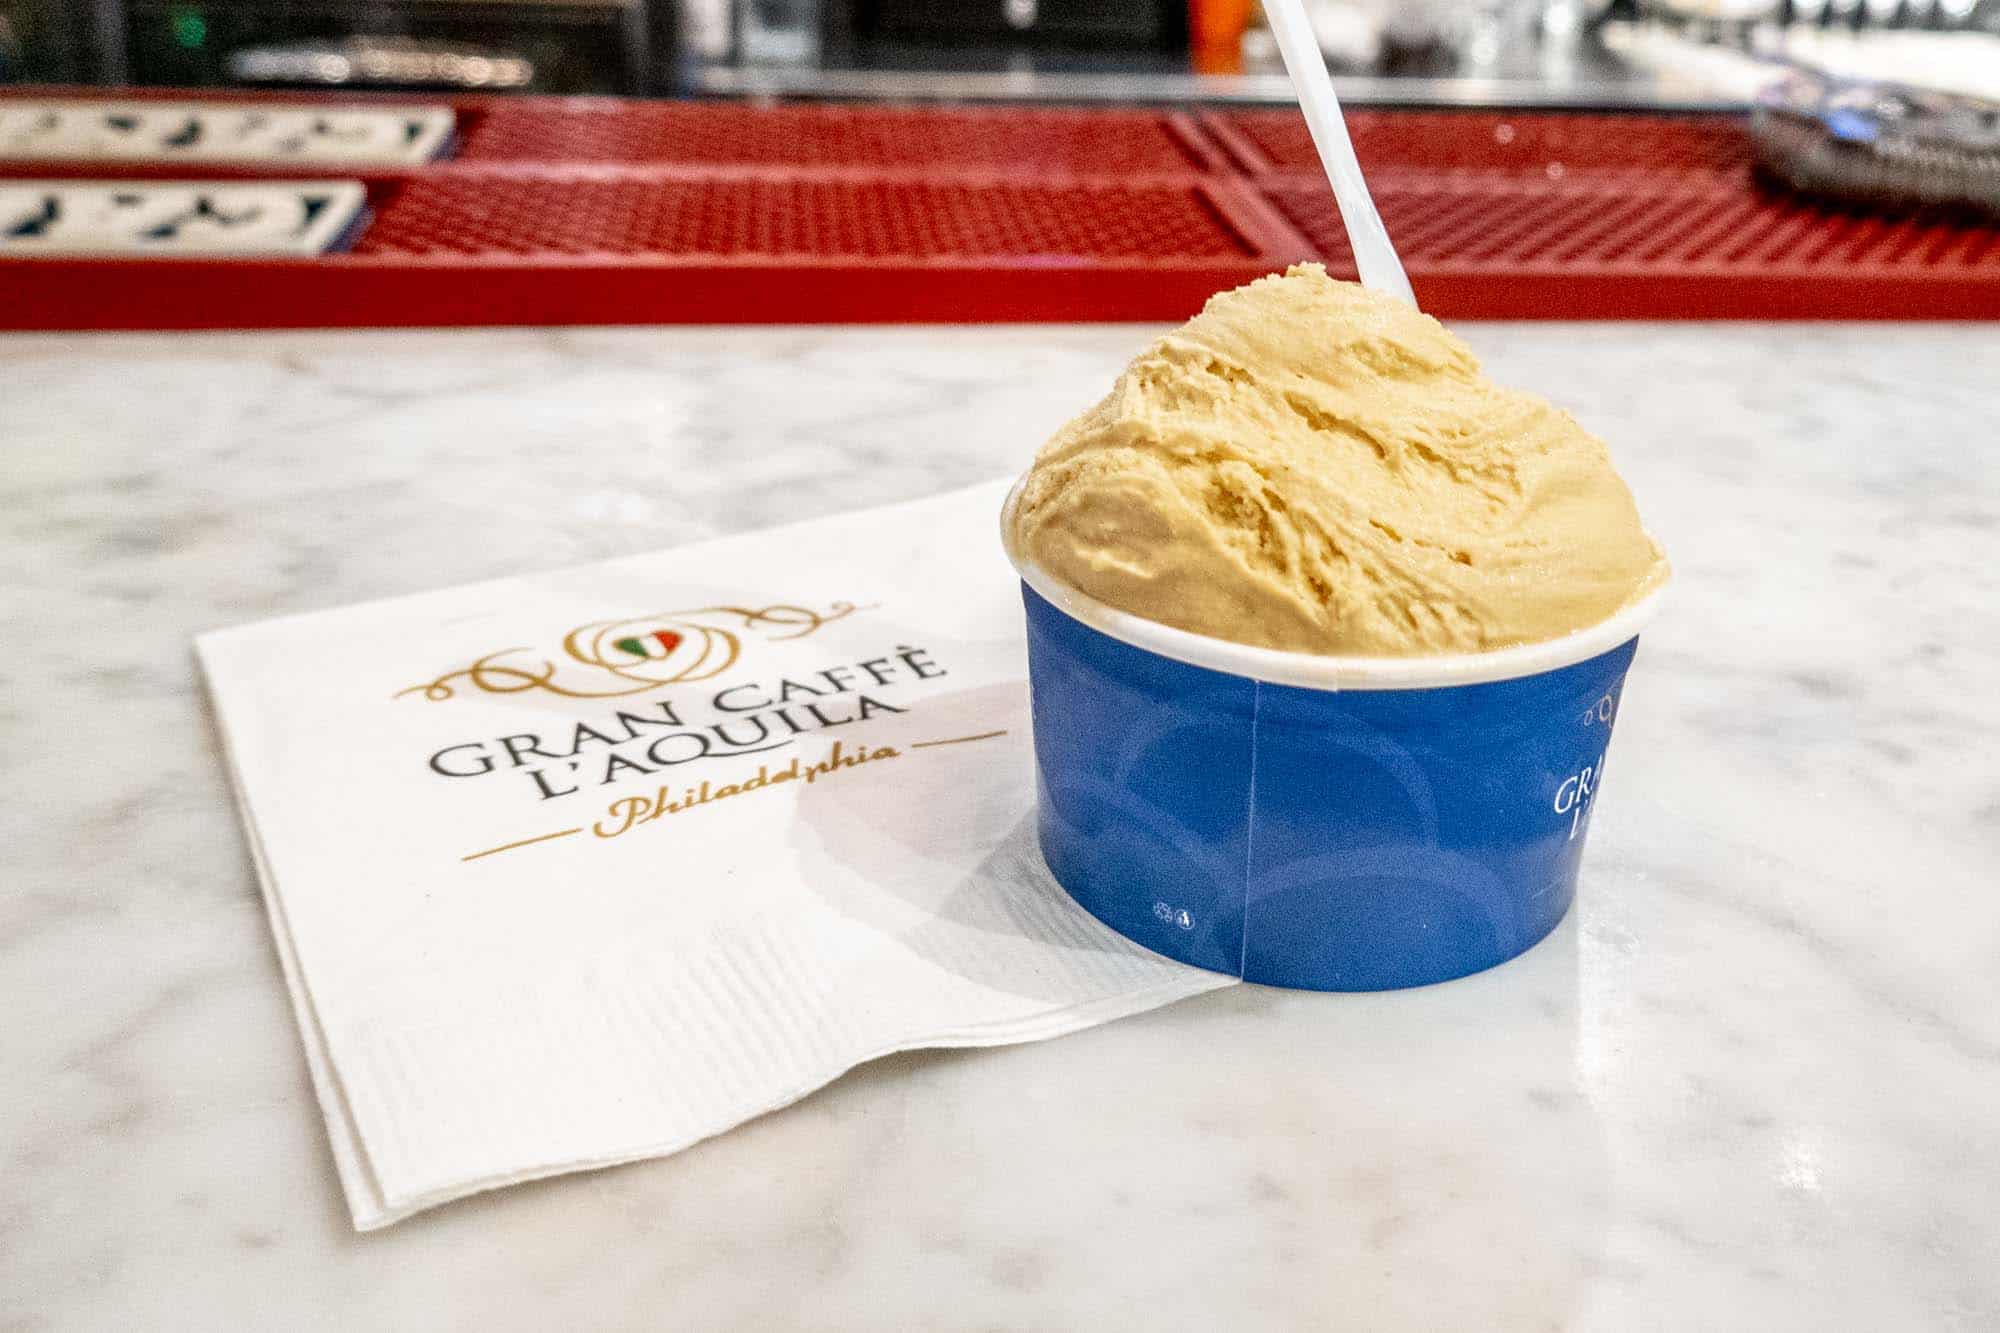 Cup of gelato on a counter next to a napkin that reads "Gran Caffe L'Aquila Philadelphia"